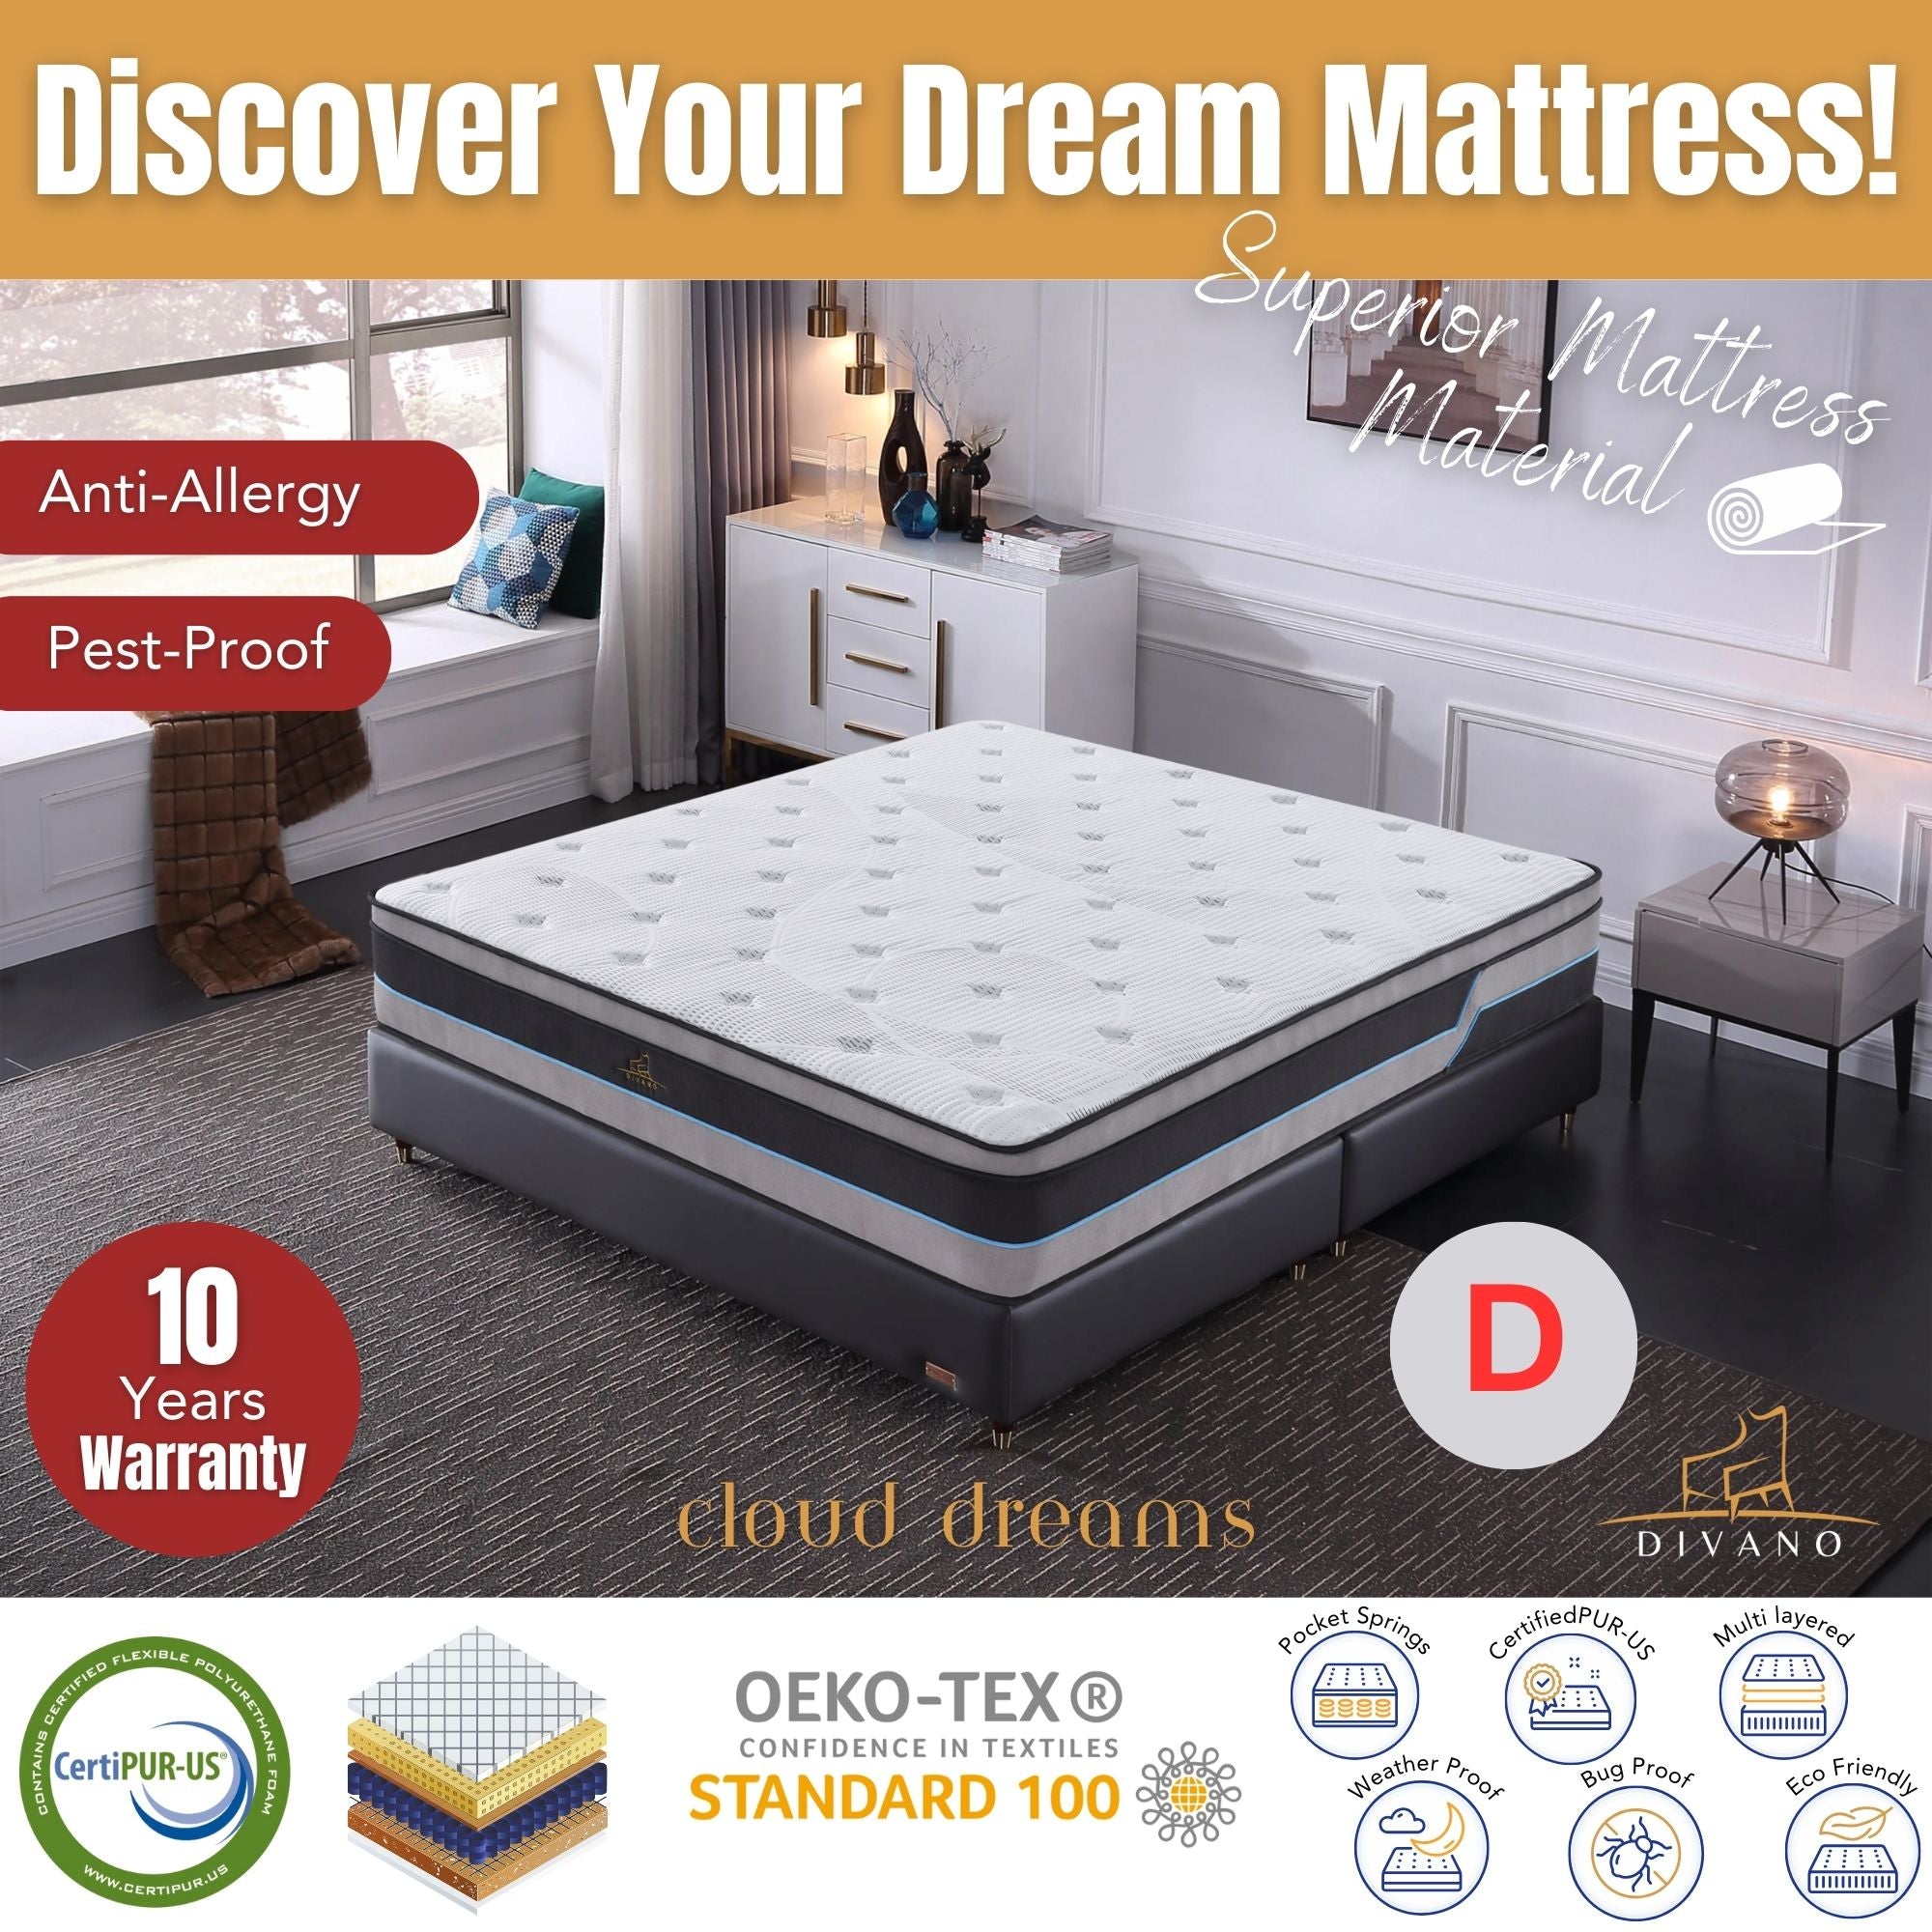 Luxury Plush Double Mattress with Pocket Springs - Cloud Dreams